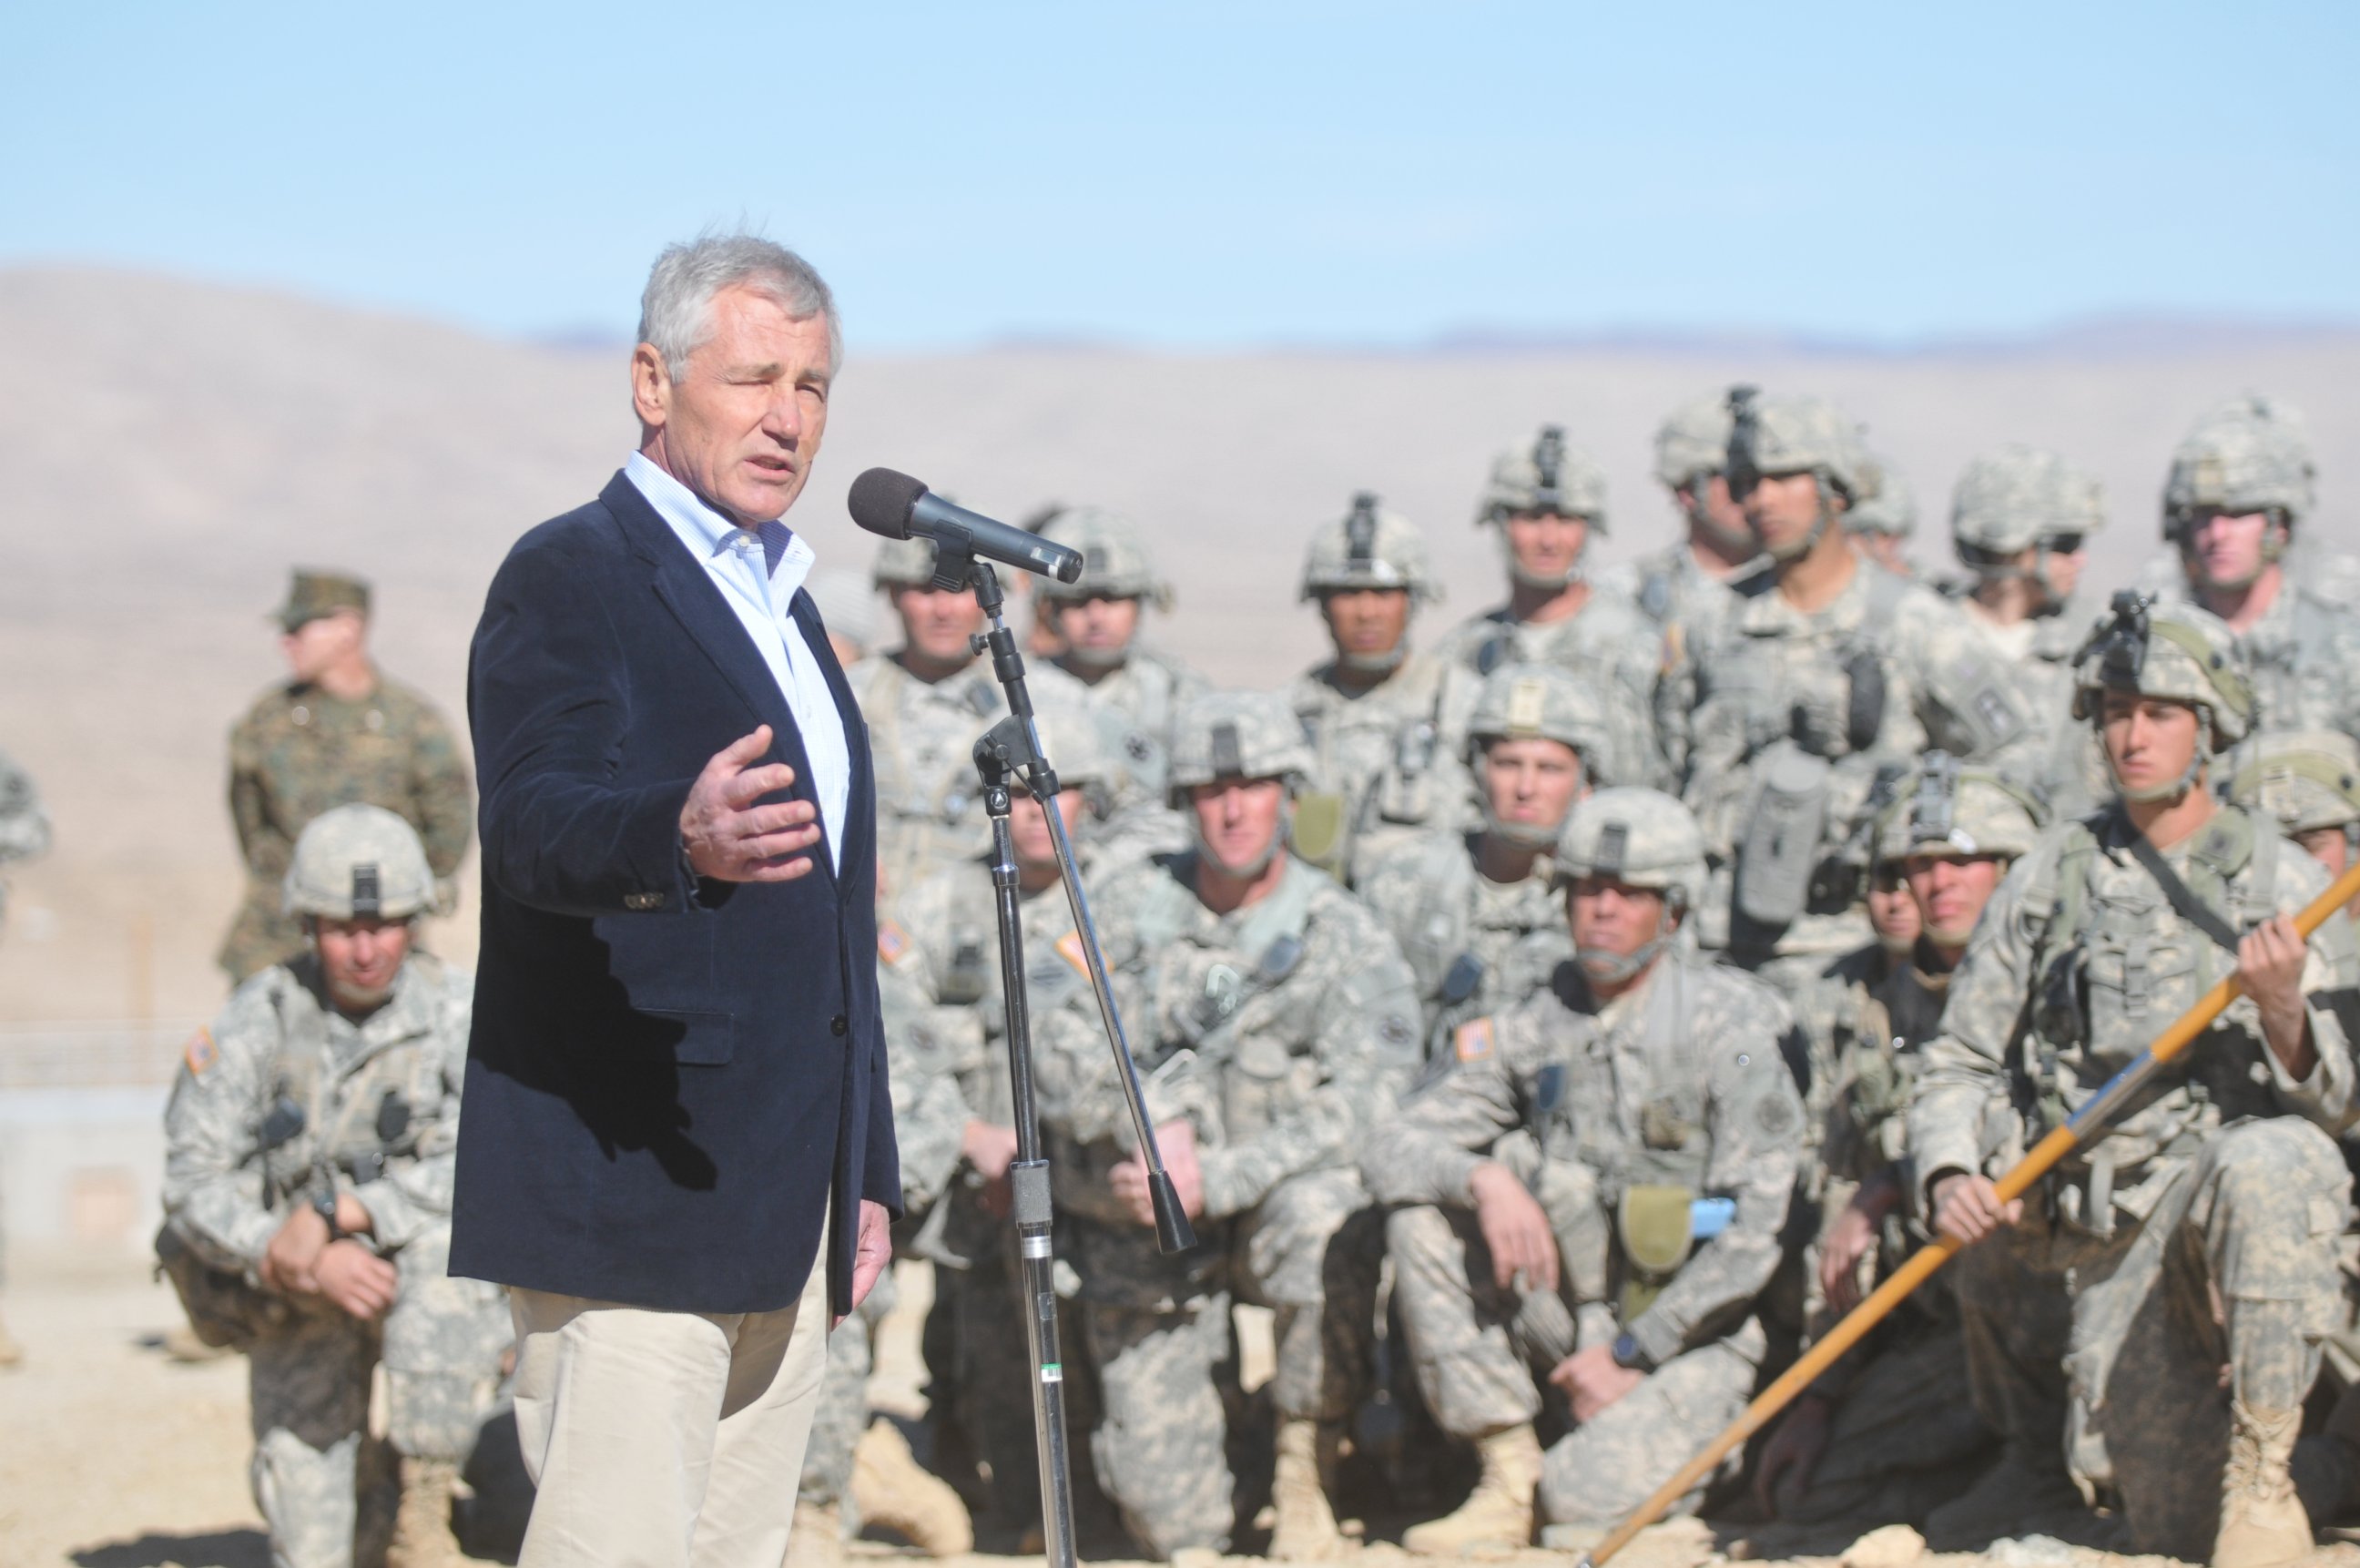 PHOTO: U.S. Secretary of Defense Chuck Hagel speaks to troops at Fort Irwin National Training Center in Fort Irwin, Calif,  during his visit on Nov. 16, 2014.